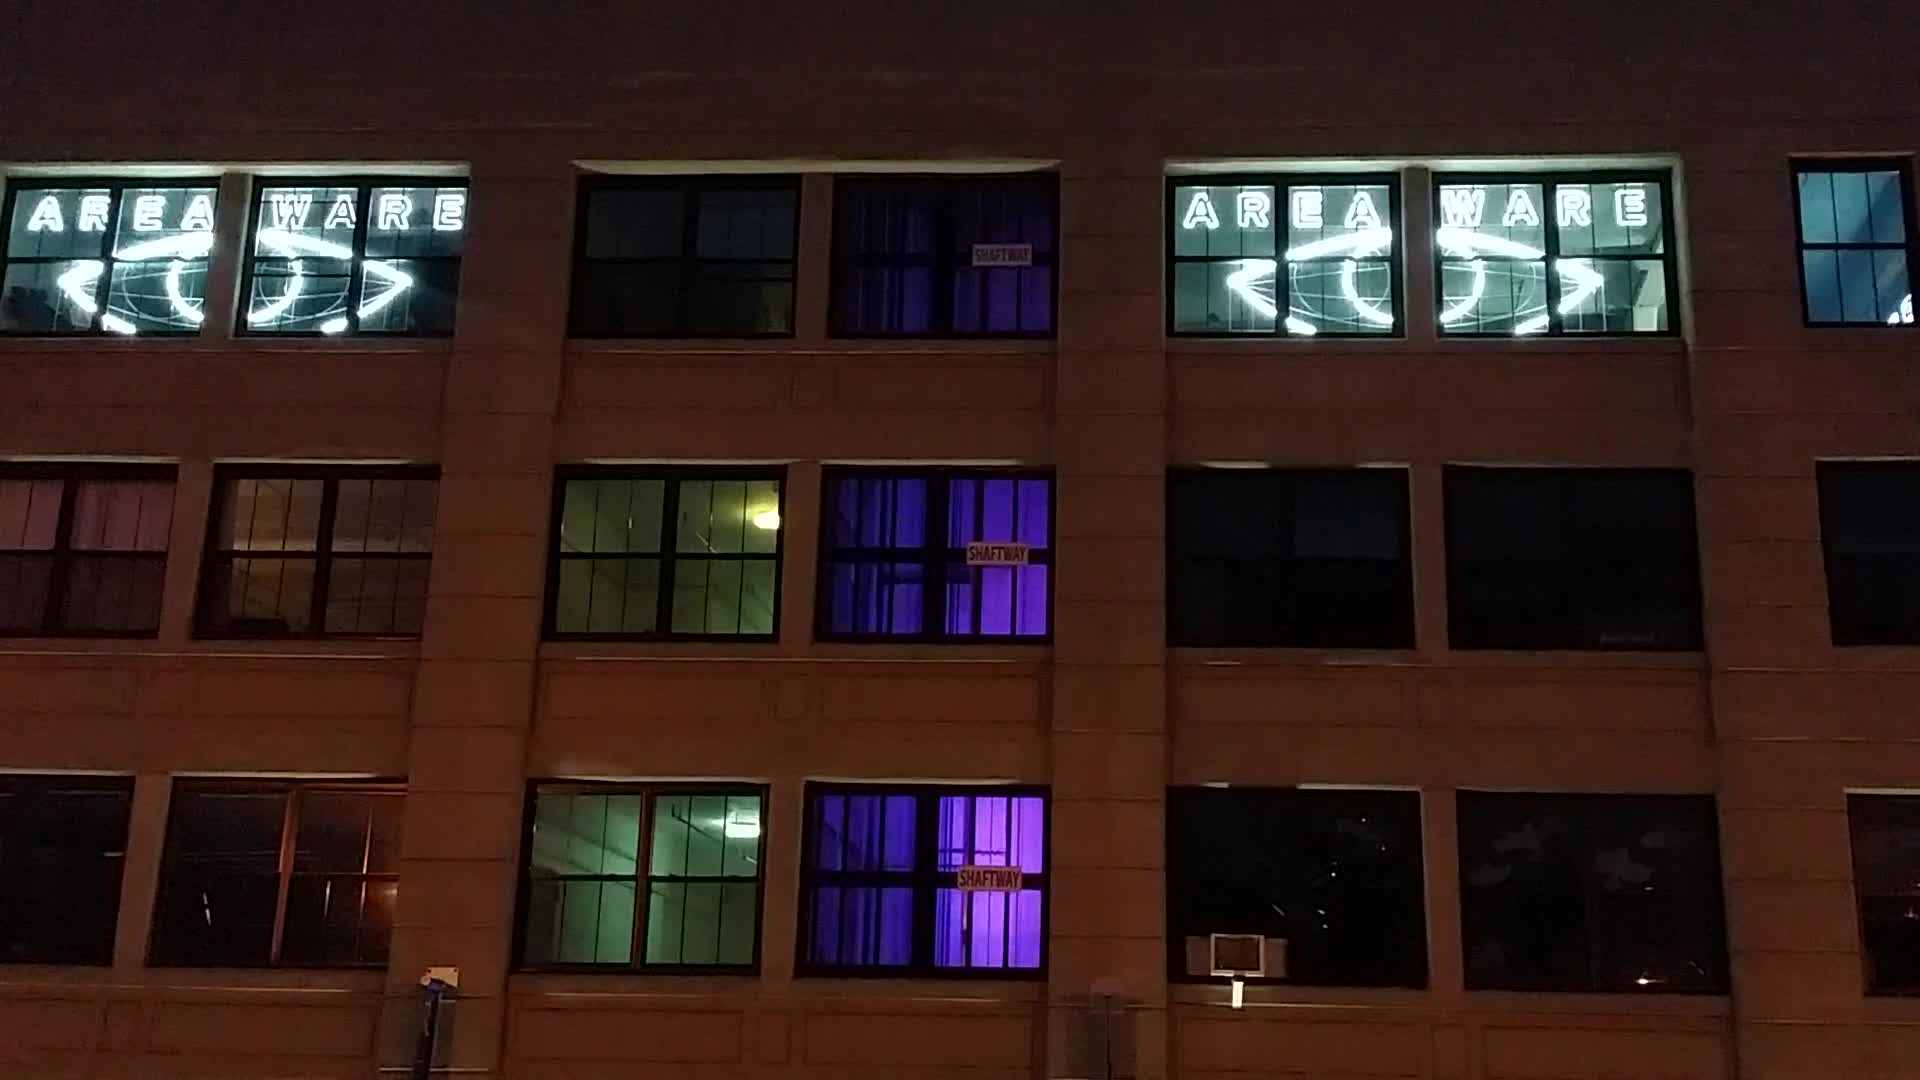 Areaware's neon eyes peering out of its office over looking the Williamsburgh bridge in Brooklyn, NY